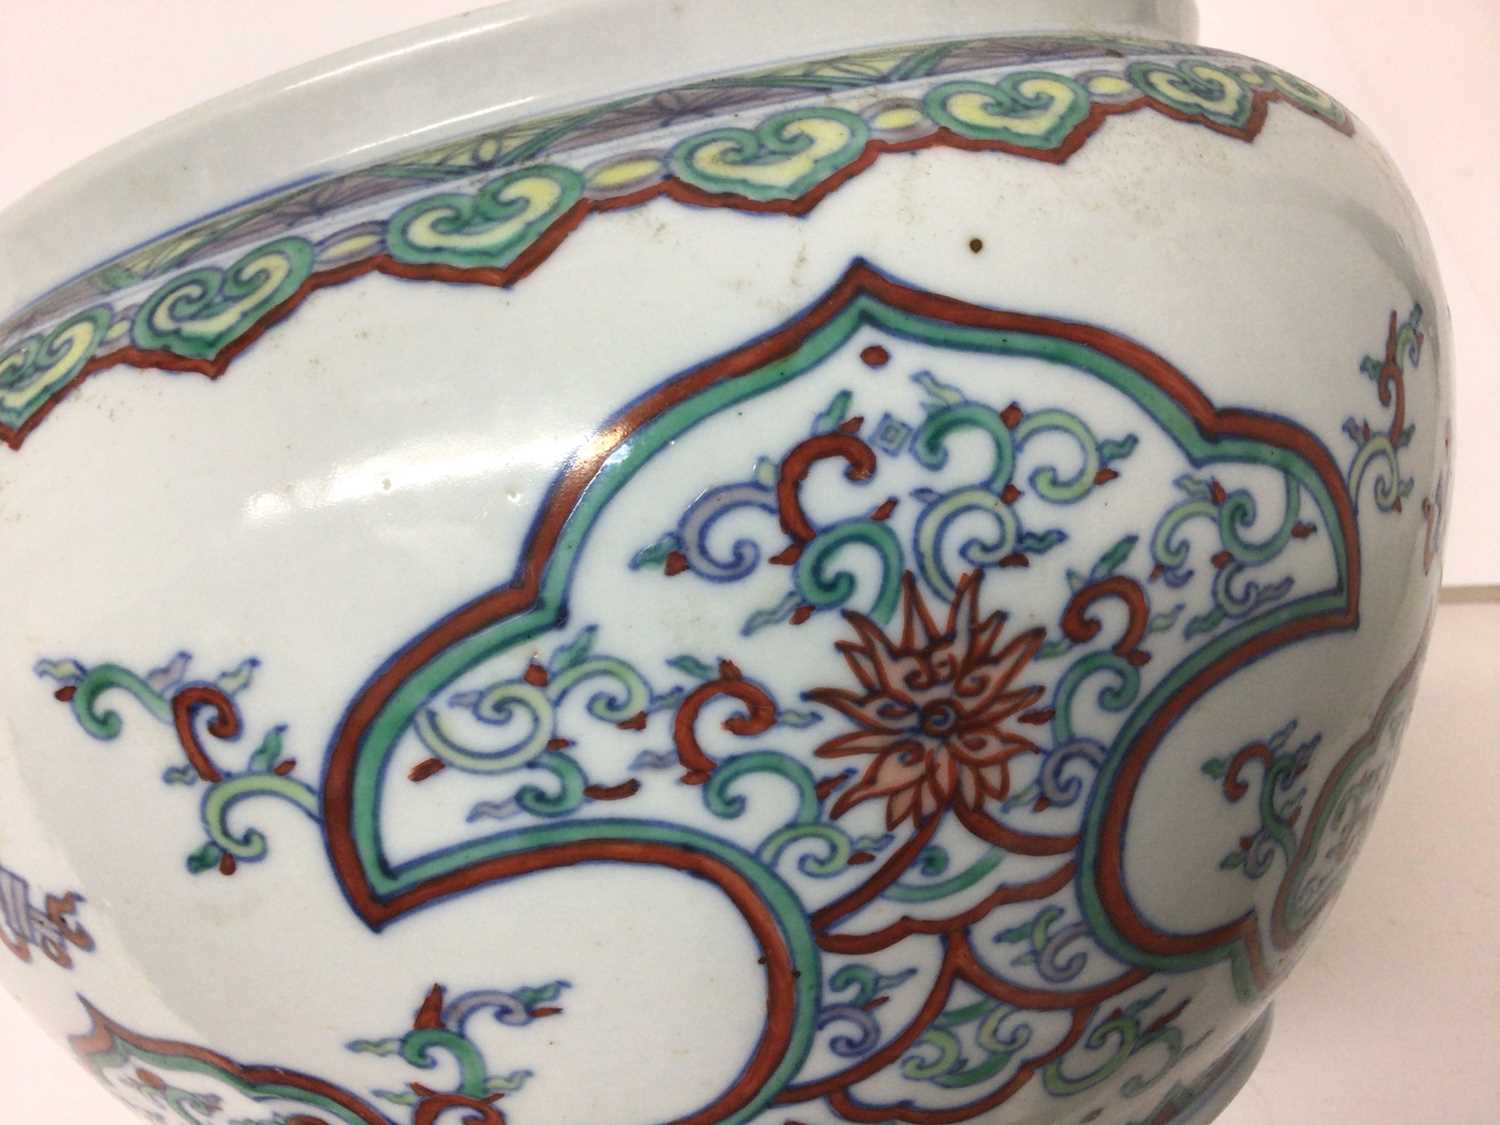 20th century Chinese porcelain jardinière decorated in the Doucai style with foliate patterns - Image 6 of 7